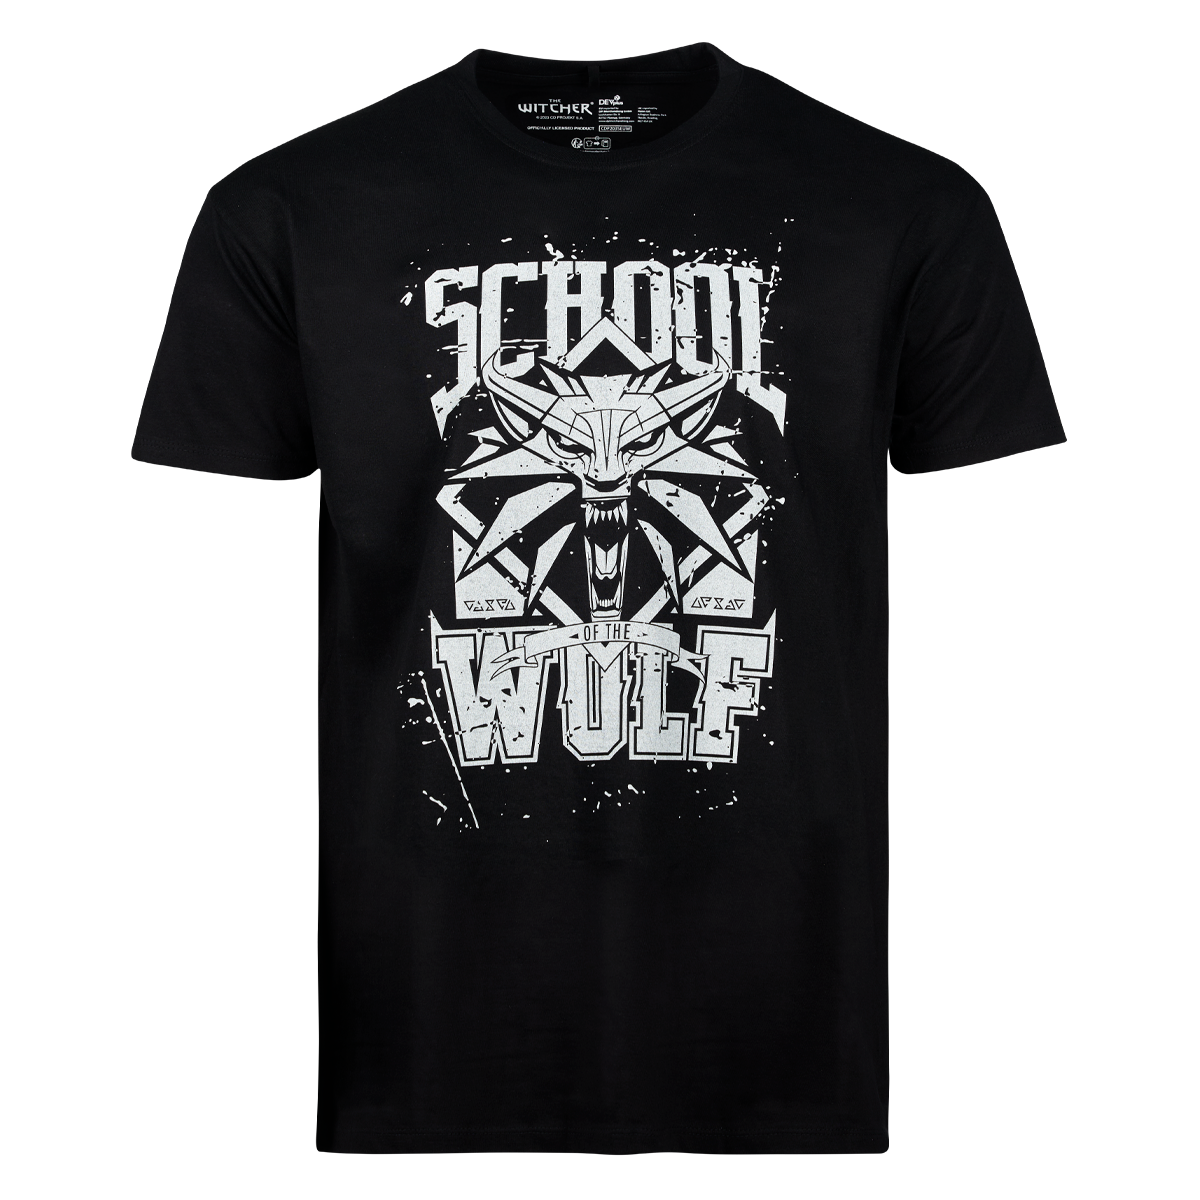 The Witcher T-Shirt "School of the Wolf" Black M Cover